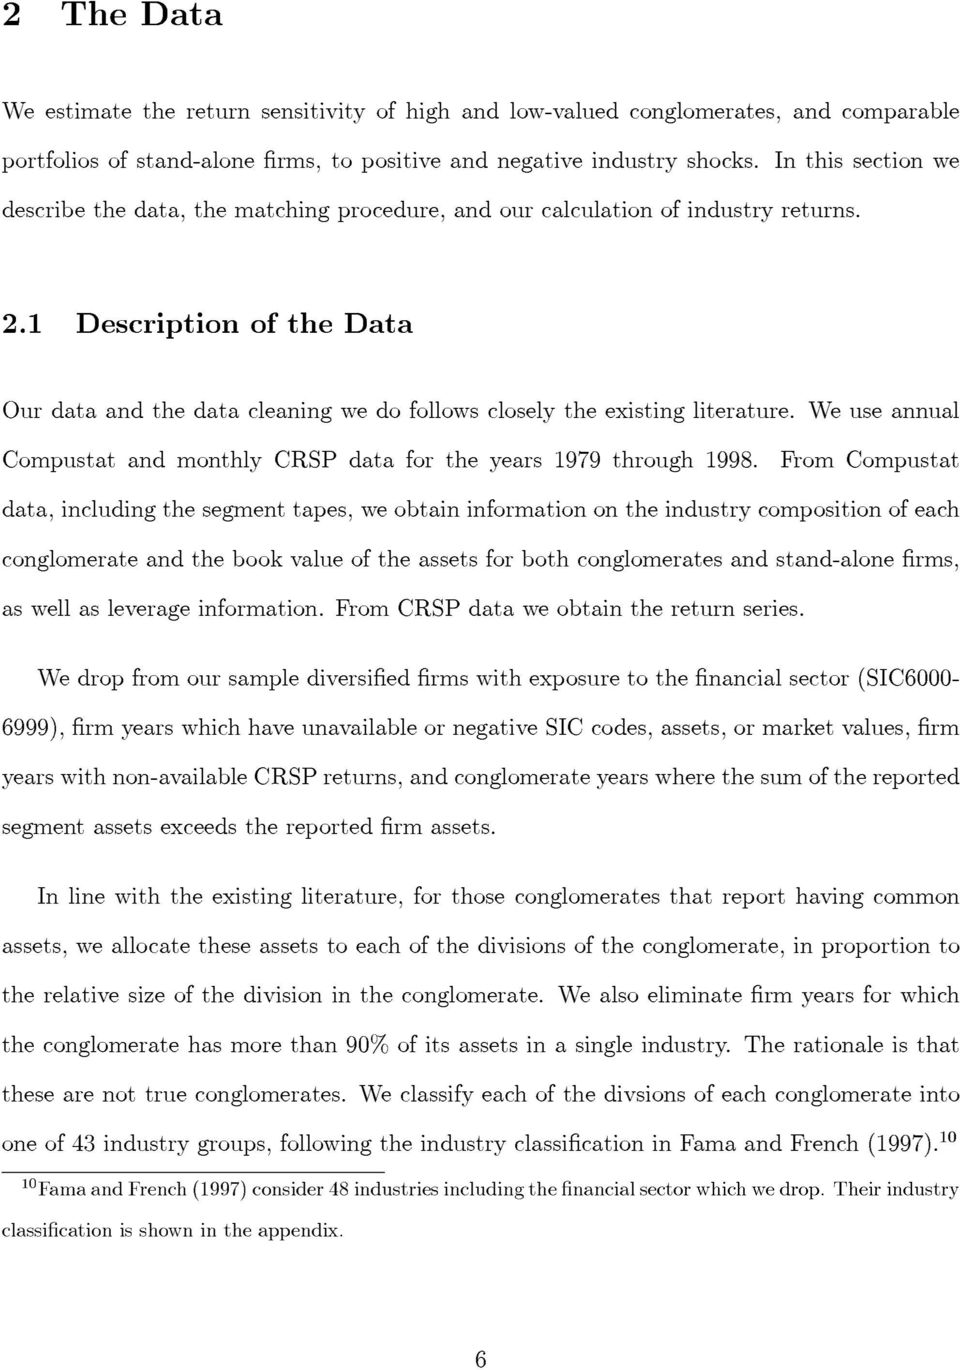 1 Description of thedata Our data and the data cleaning we do follows closely the existing literature. We use annual Compustat and monthly CRSP data for the years 1979 through 1998.